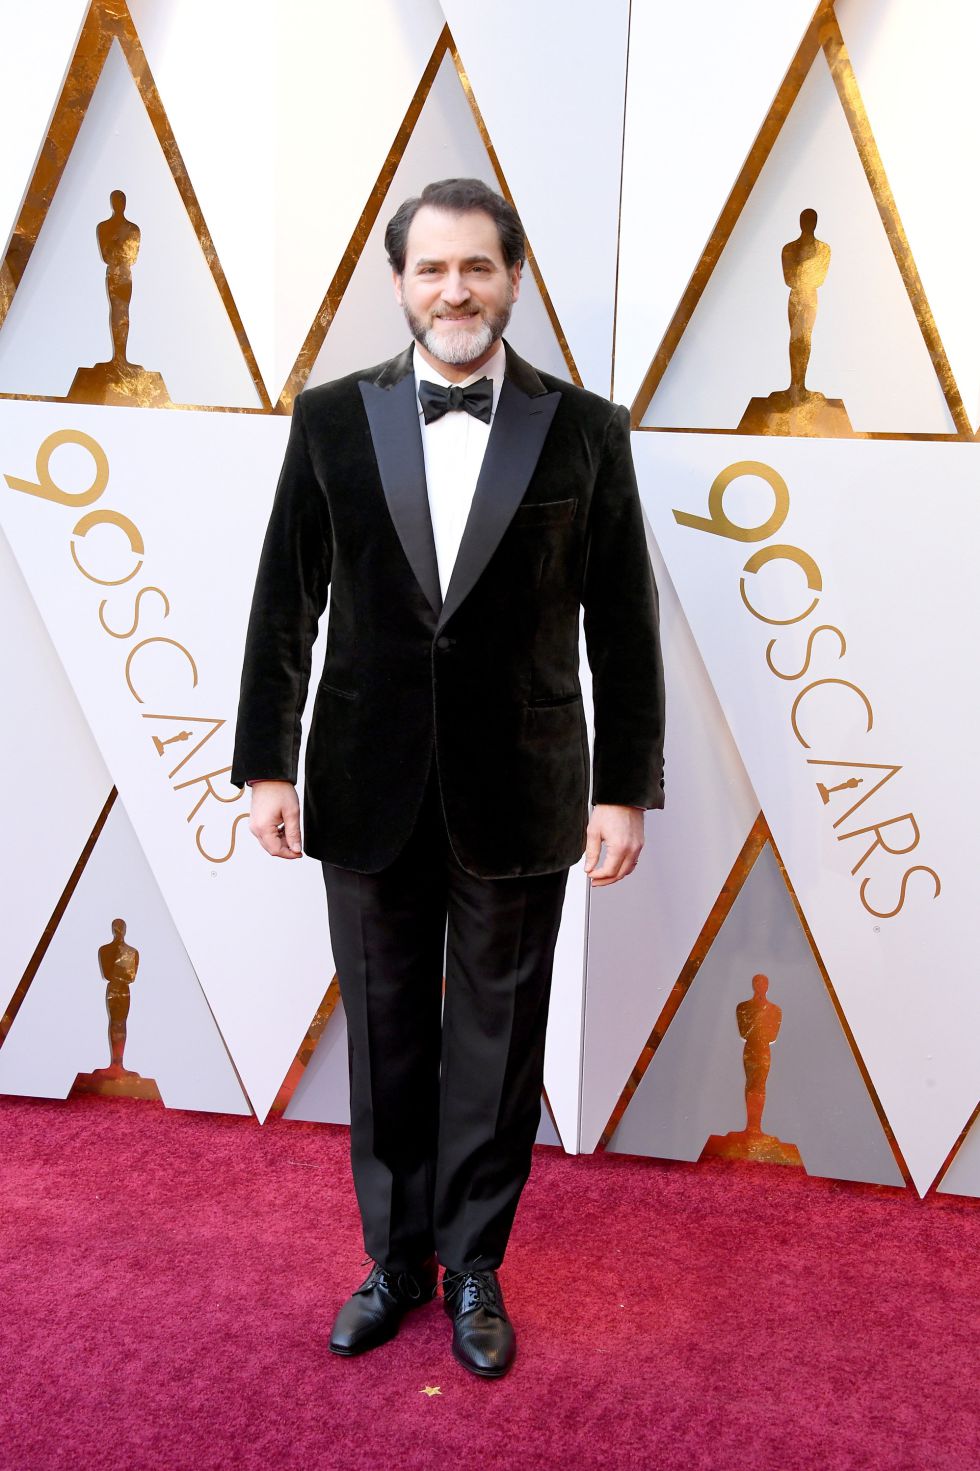 Michael Stuhlbarg ('Call me by your name', 'La forma del agua')